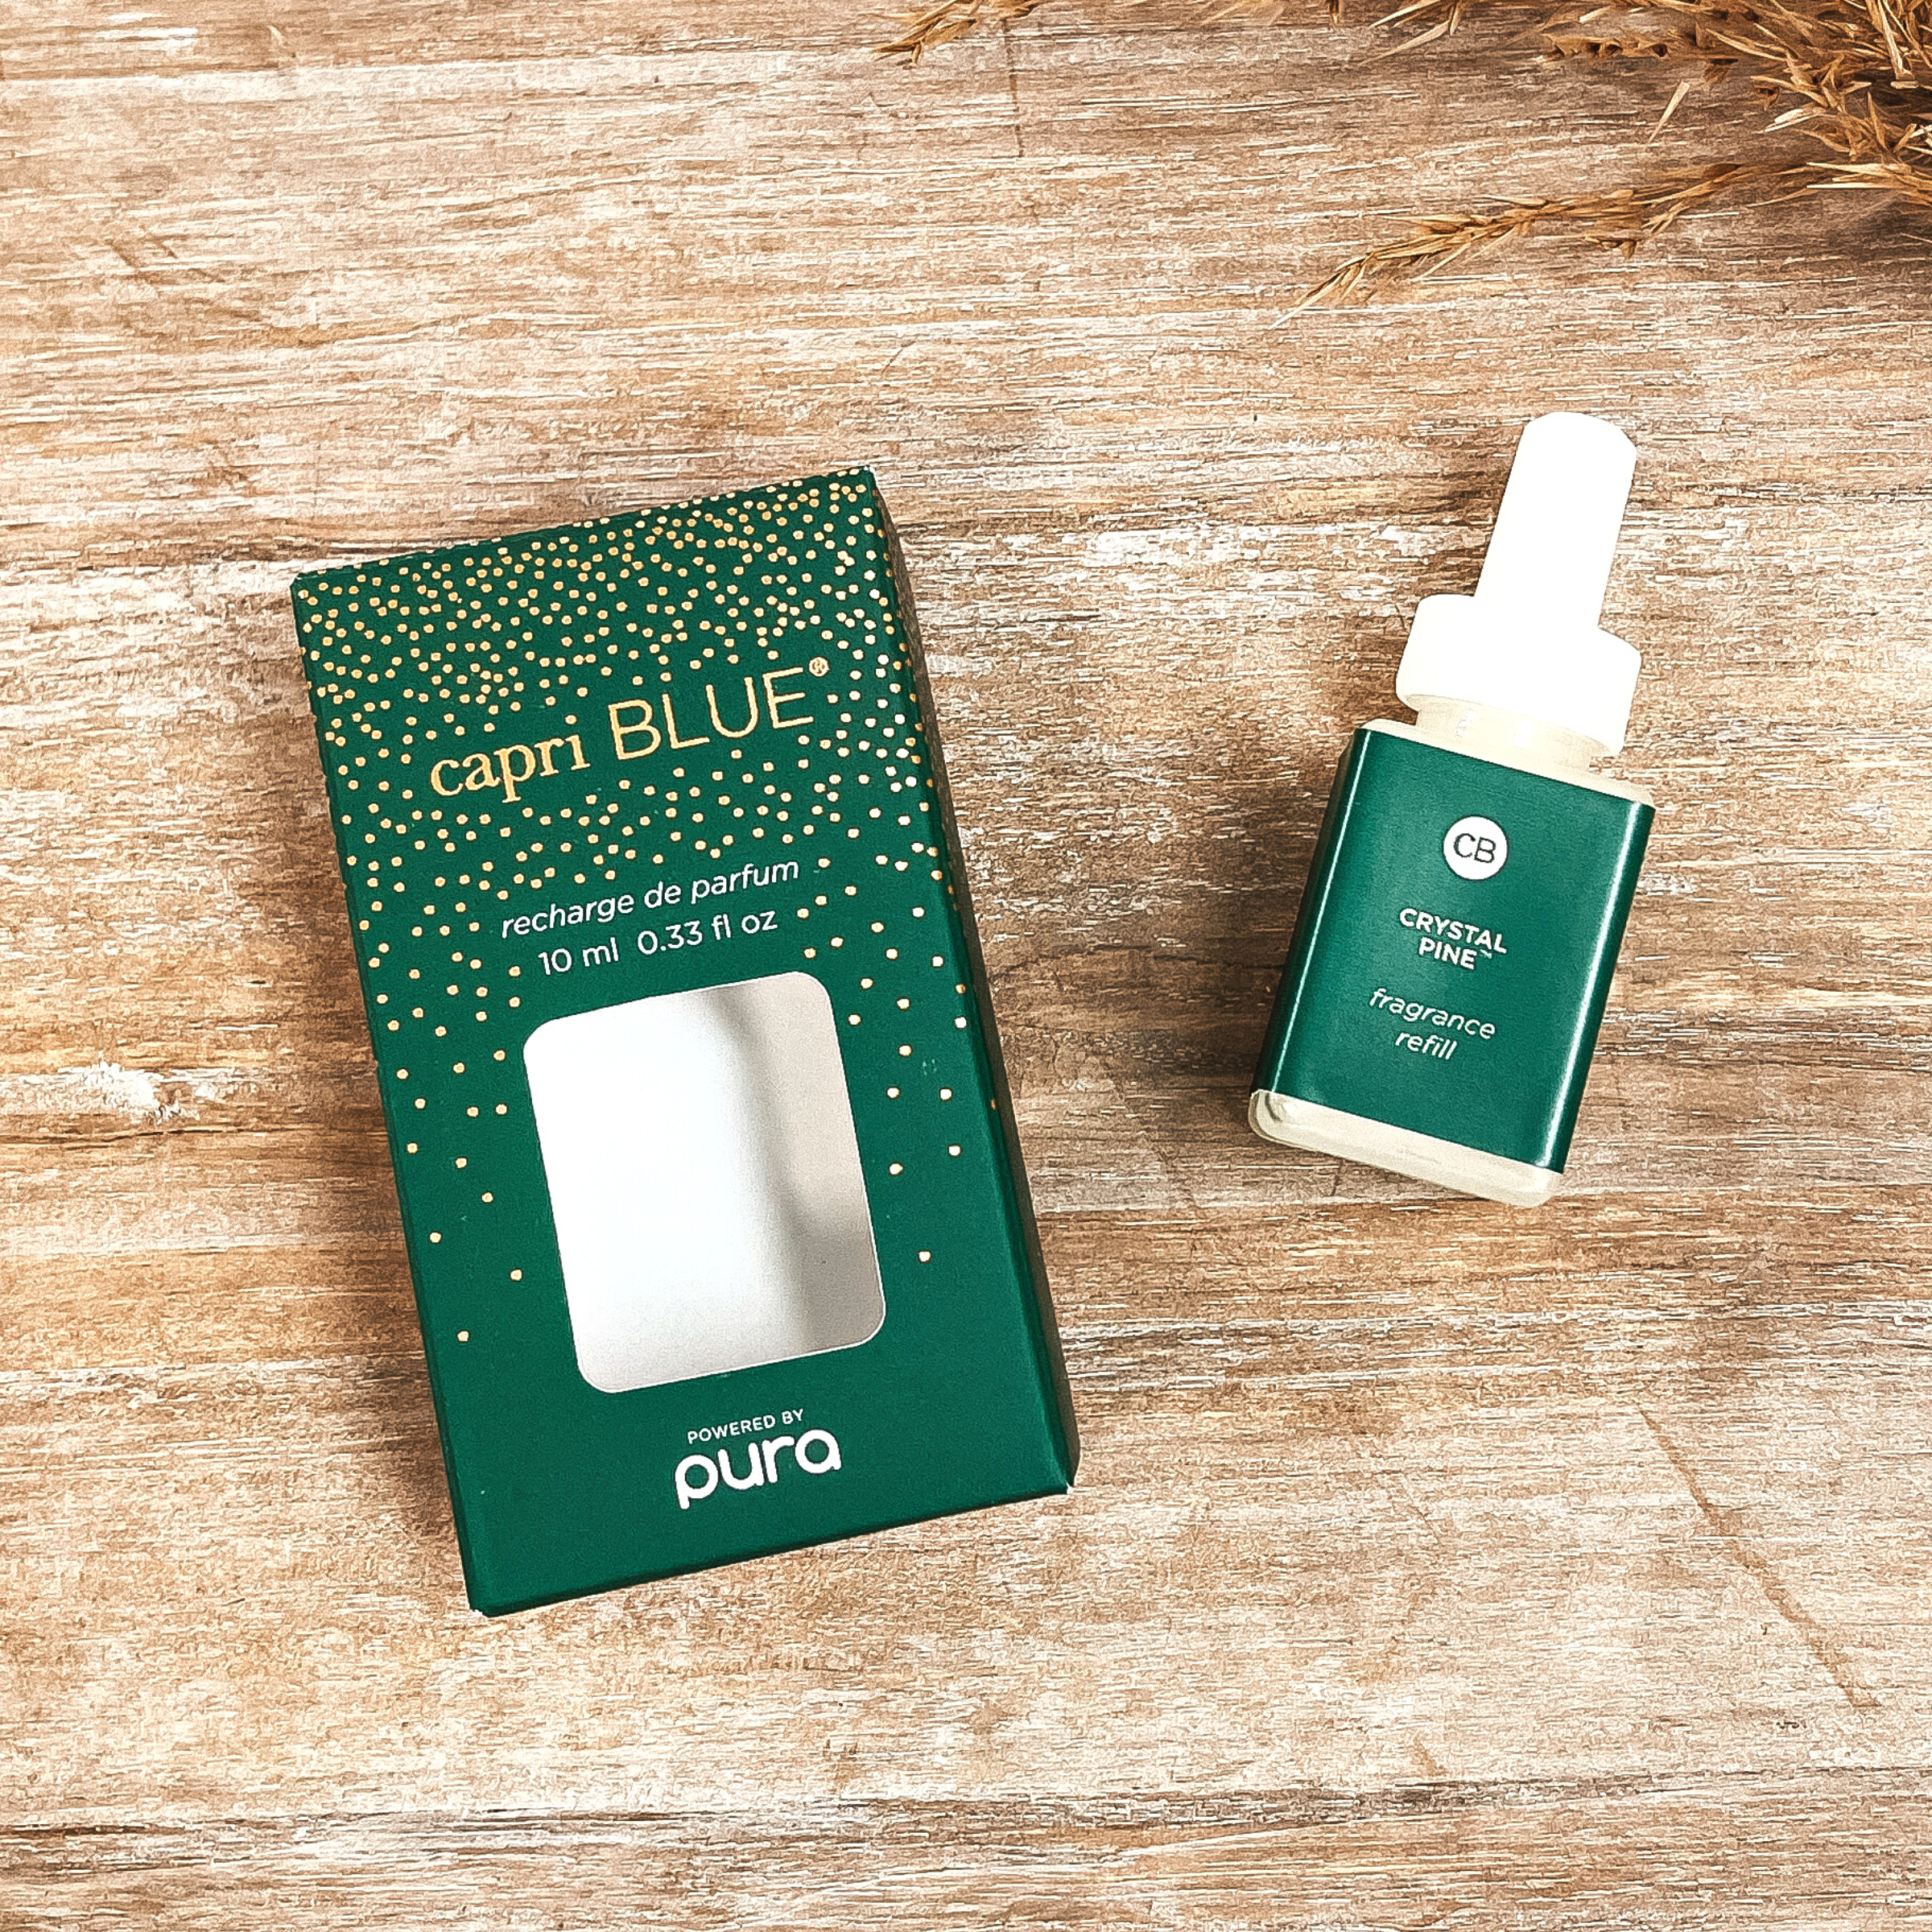 Pura x Capri Blue | Replacement Fragrance Inserts for Smart Home Diffuser | Crystal Pine Glimmer - Giddy Up Glamour Boutique